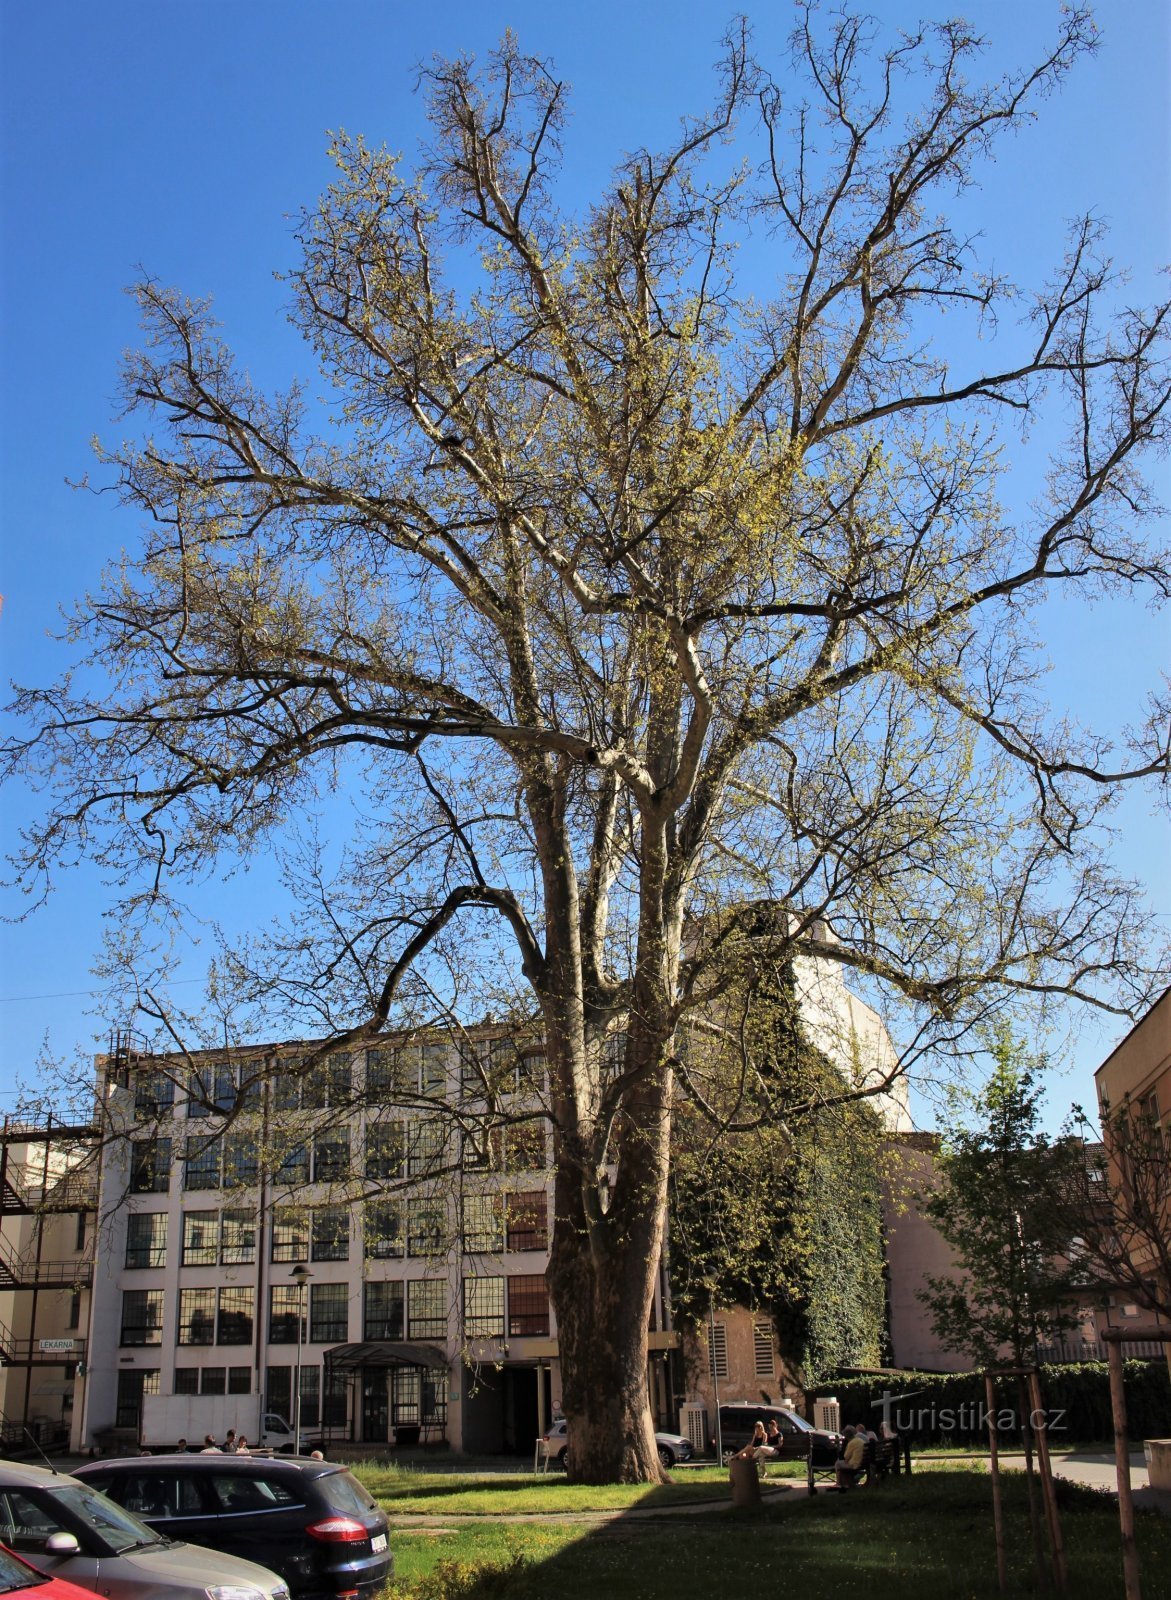 Sycamore at St. Anne's in 2010